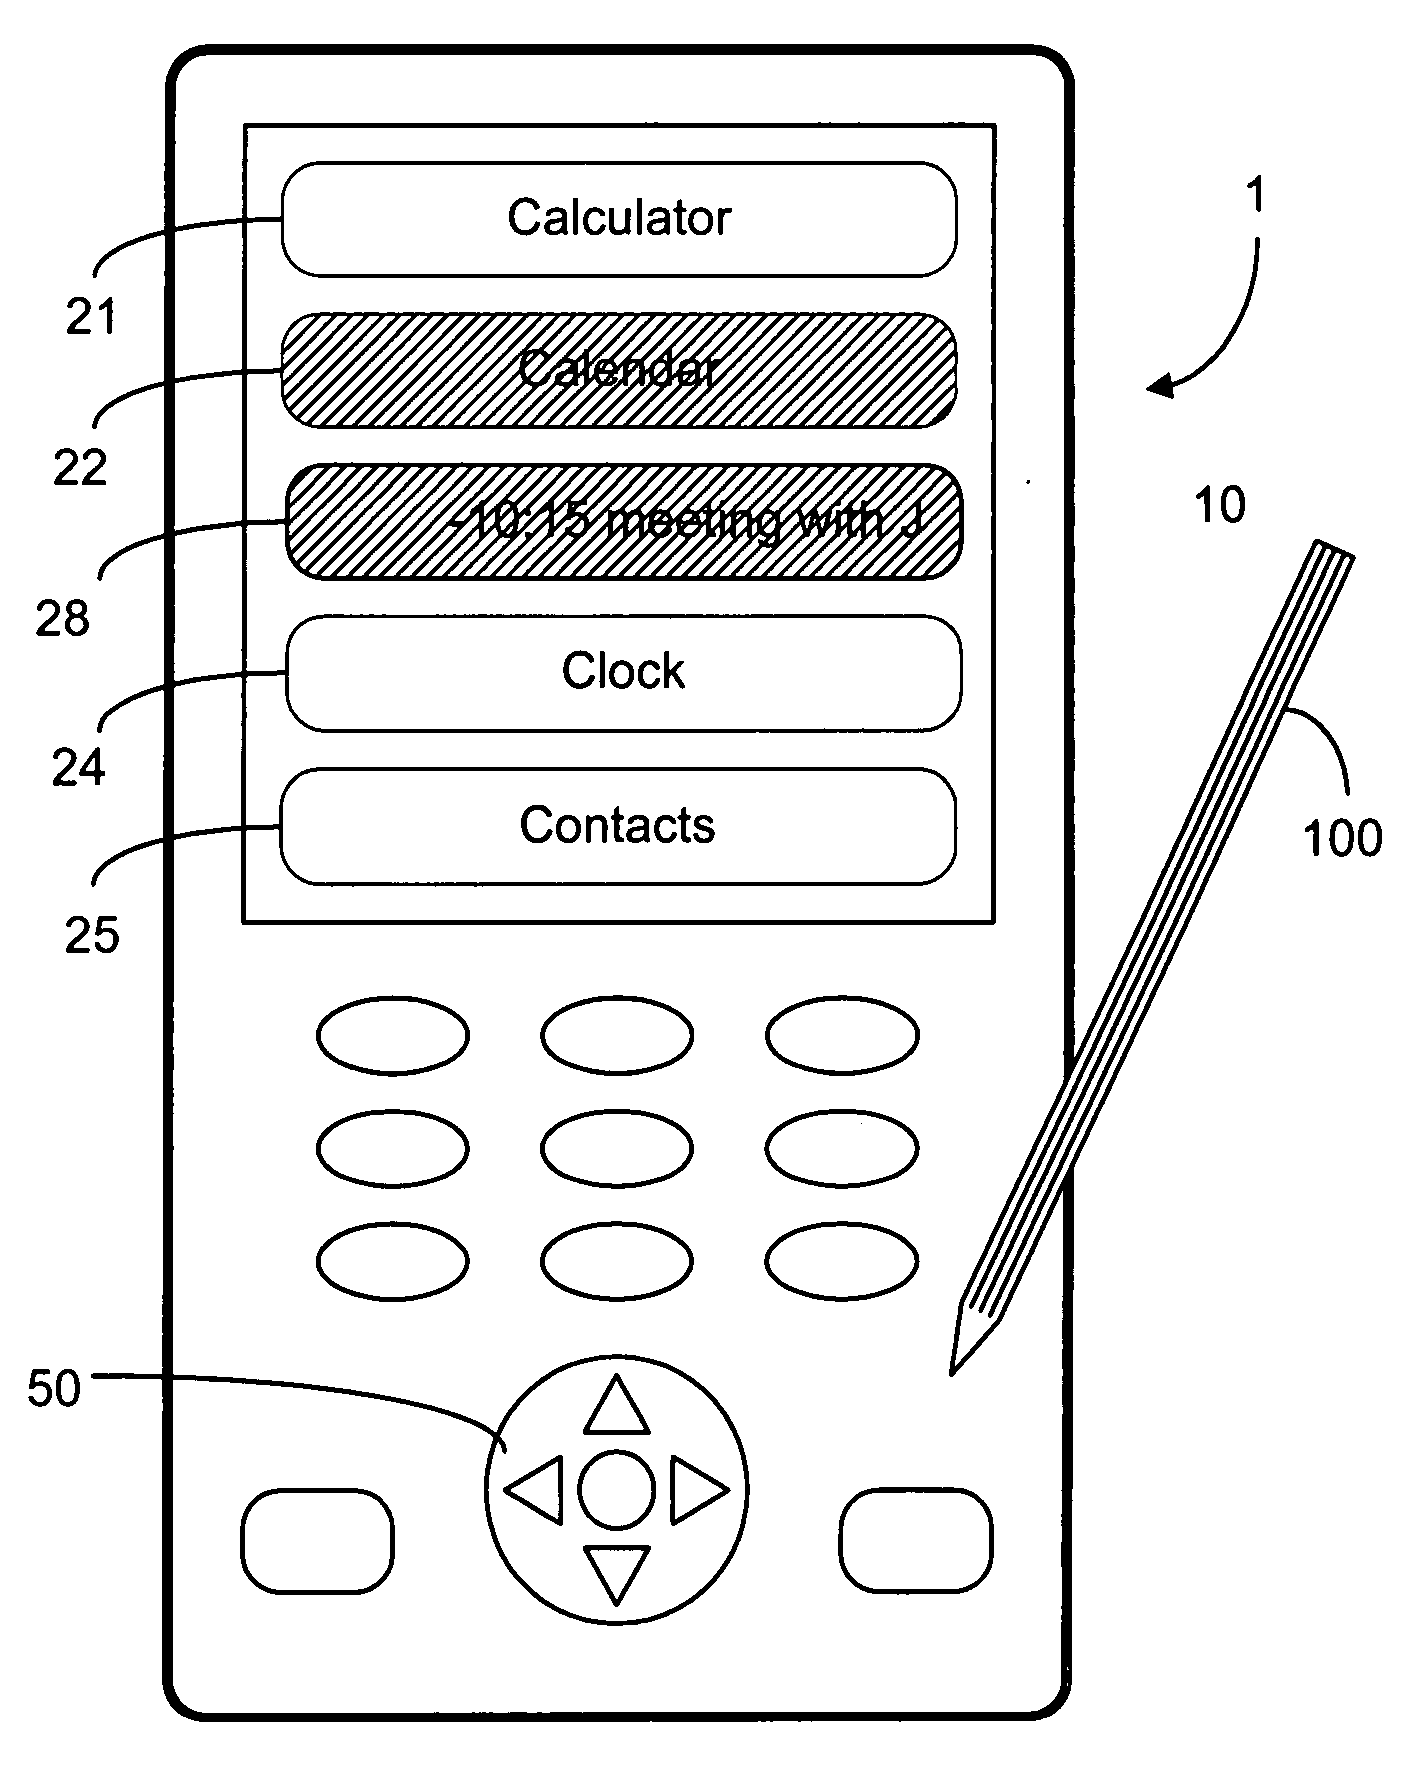 Animated user-interface in electronic devices